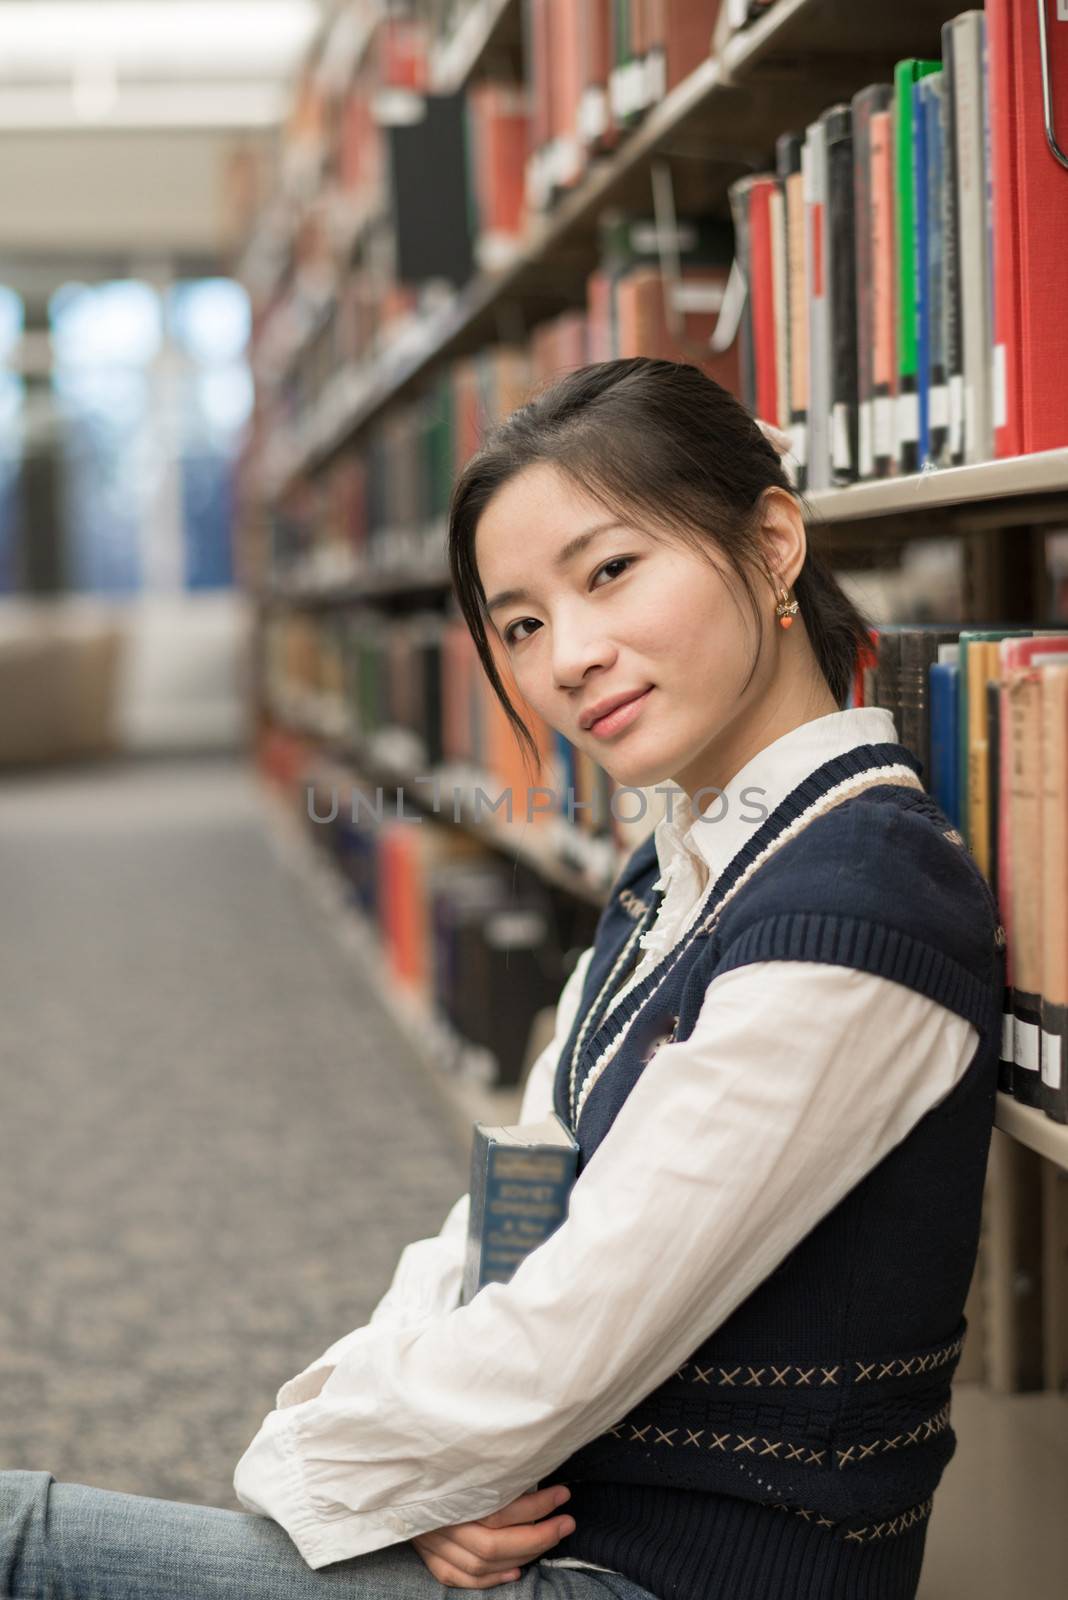 Portrait of attractive young girl sitting on the floor in front of a bookshelf holding a thick old book